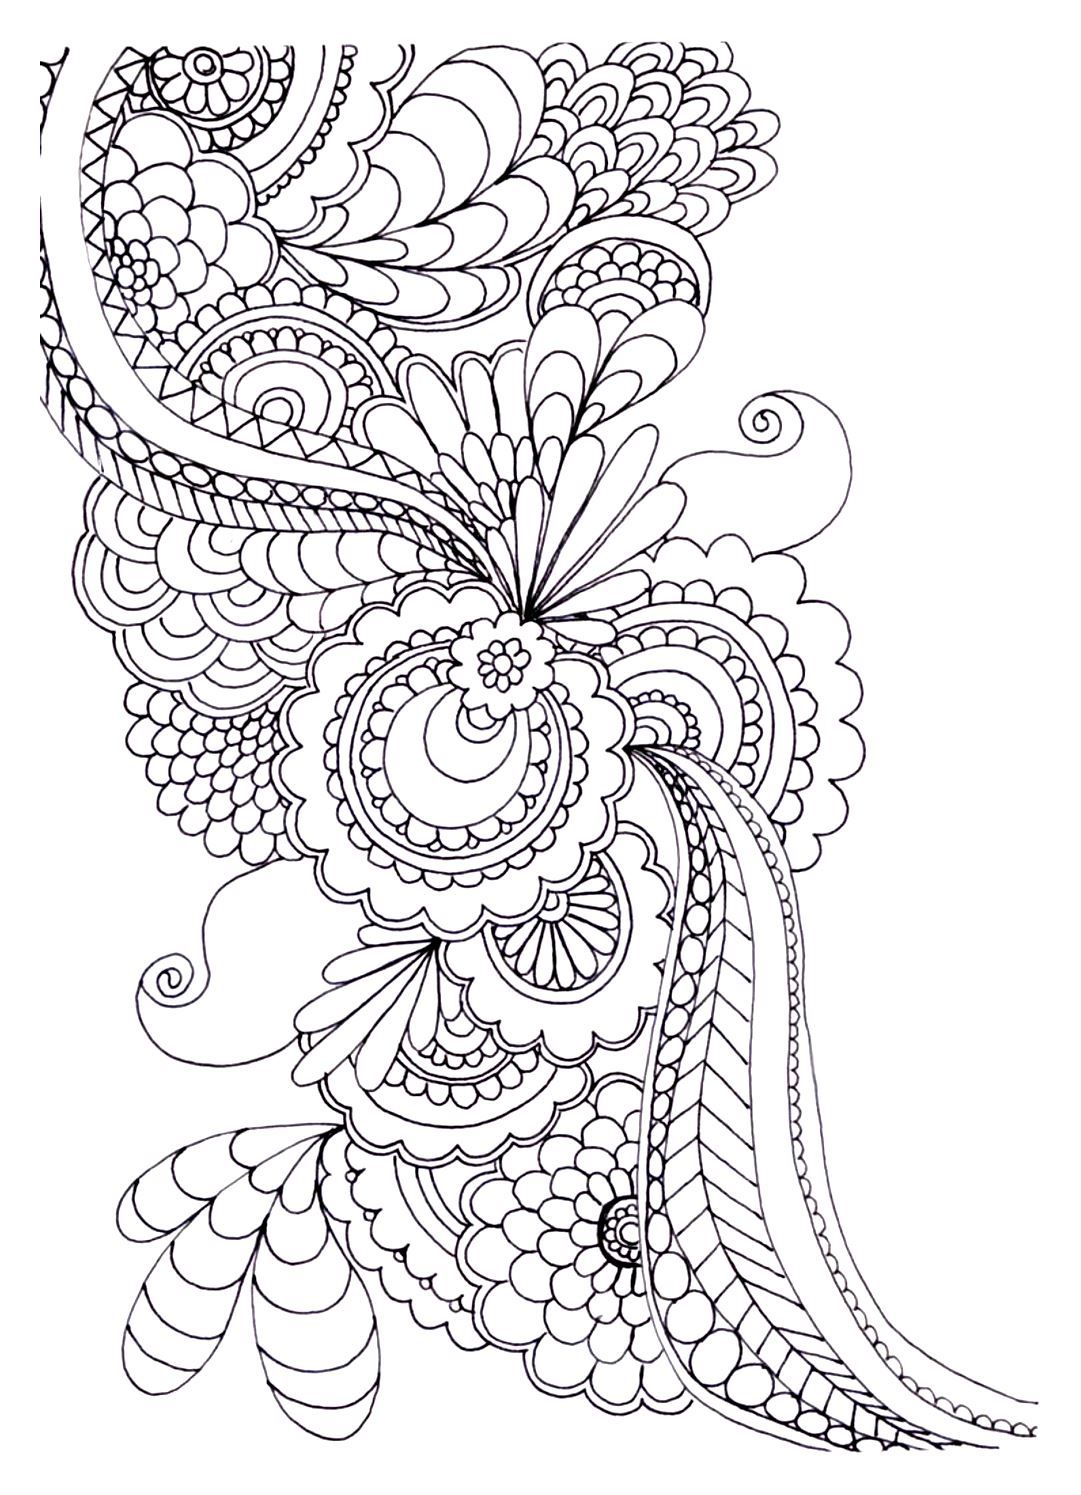 To print this free coloring page «coloring-adult-zen-anti-stress ...